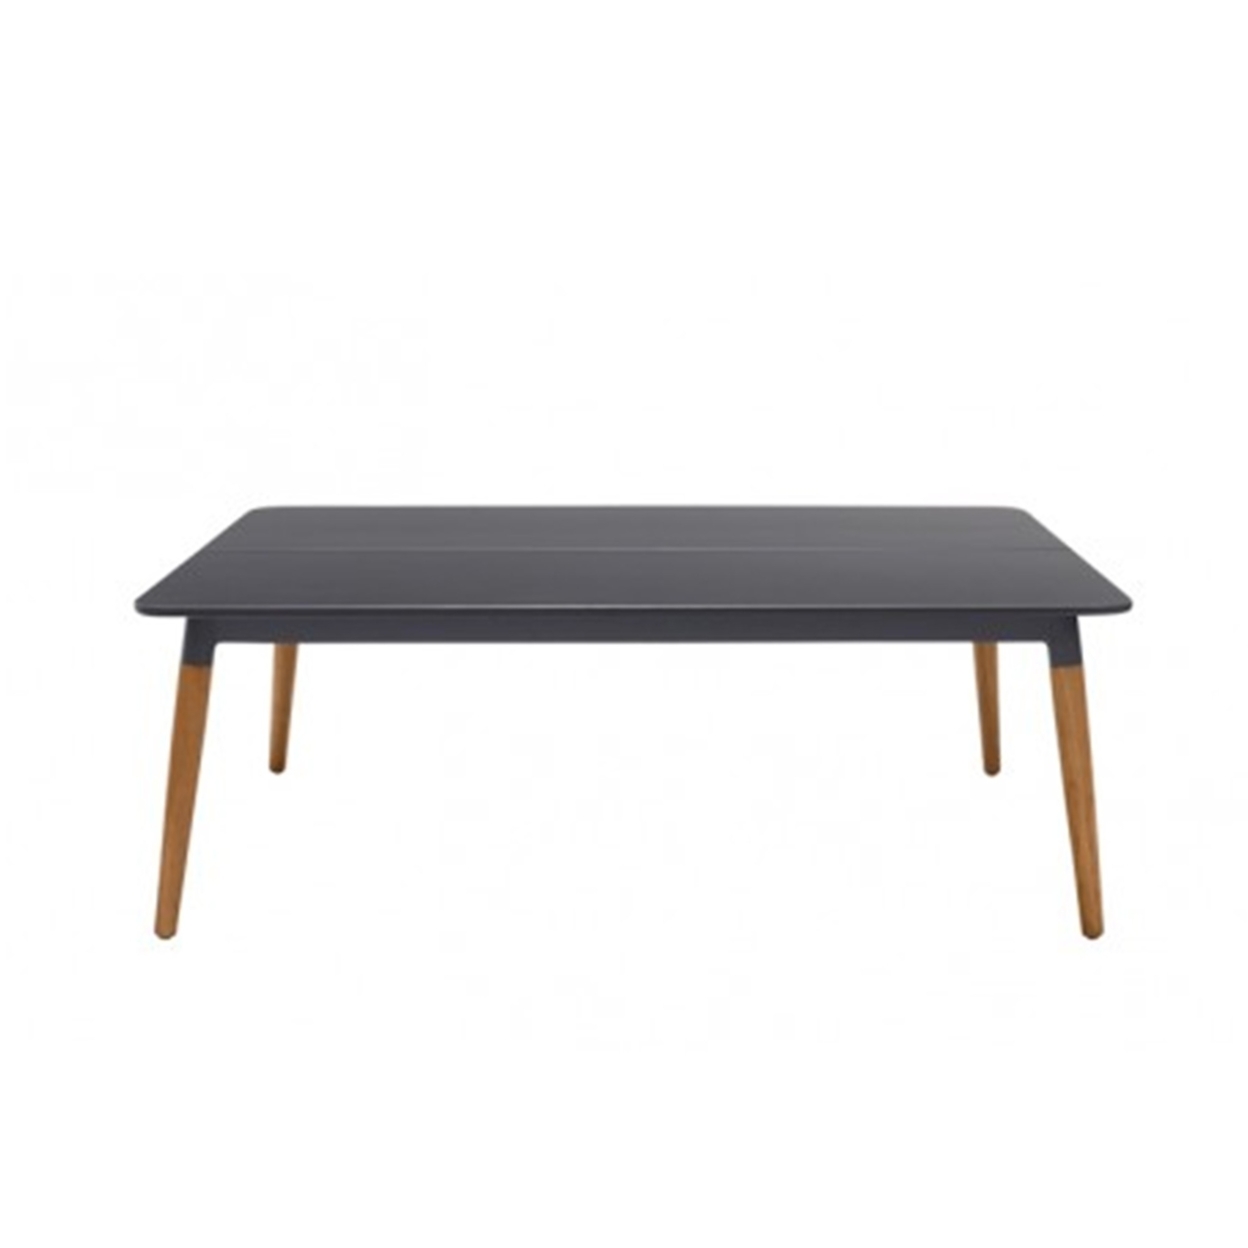 Outdoor Coffee Table With Rounded Wooden Legs, Dark Gray- Saltoro Sherpi